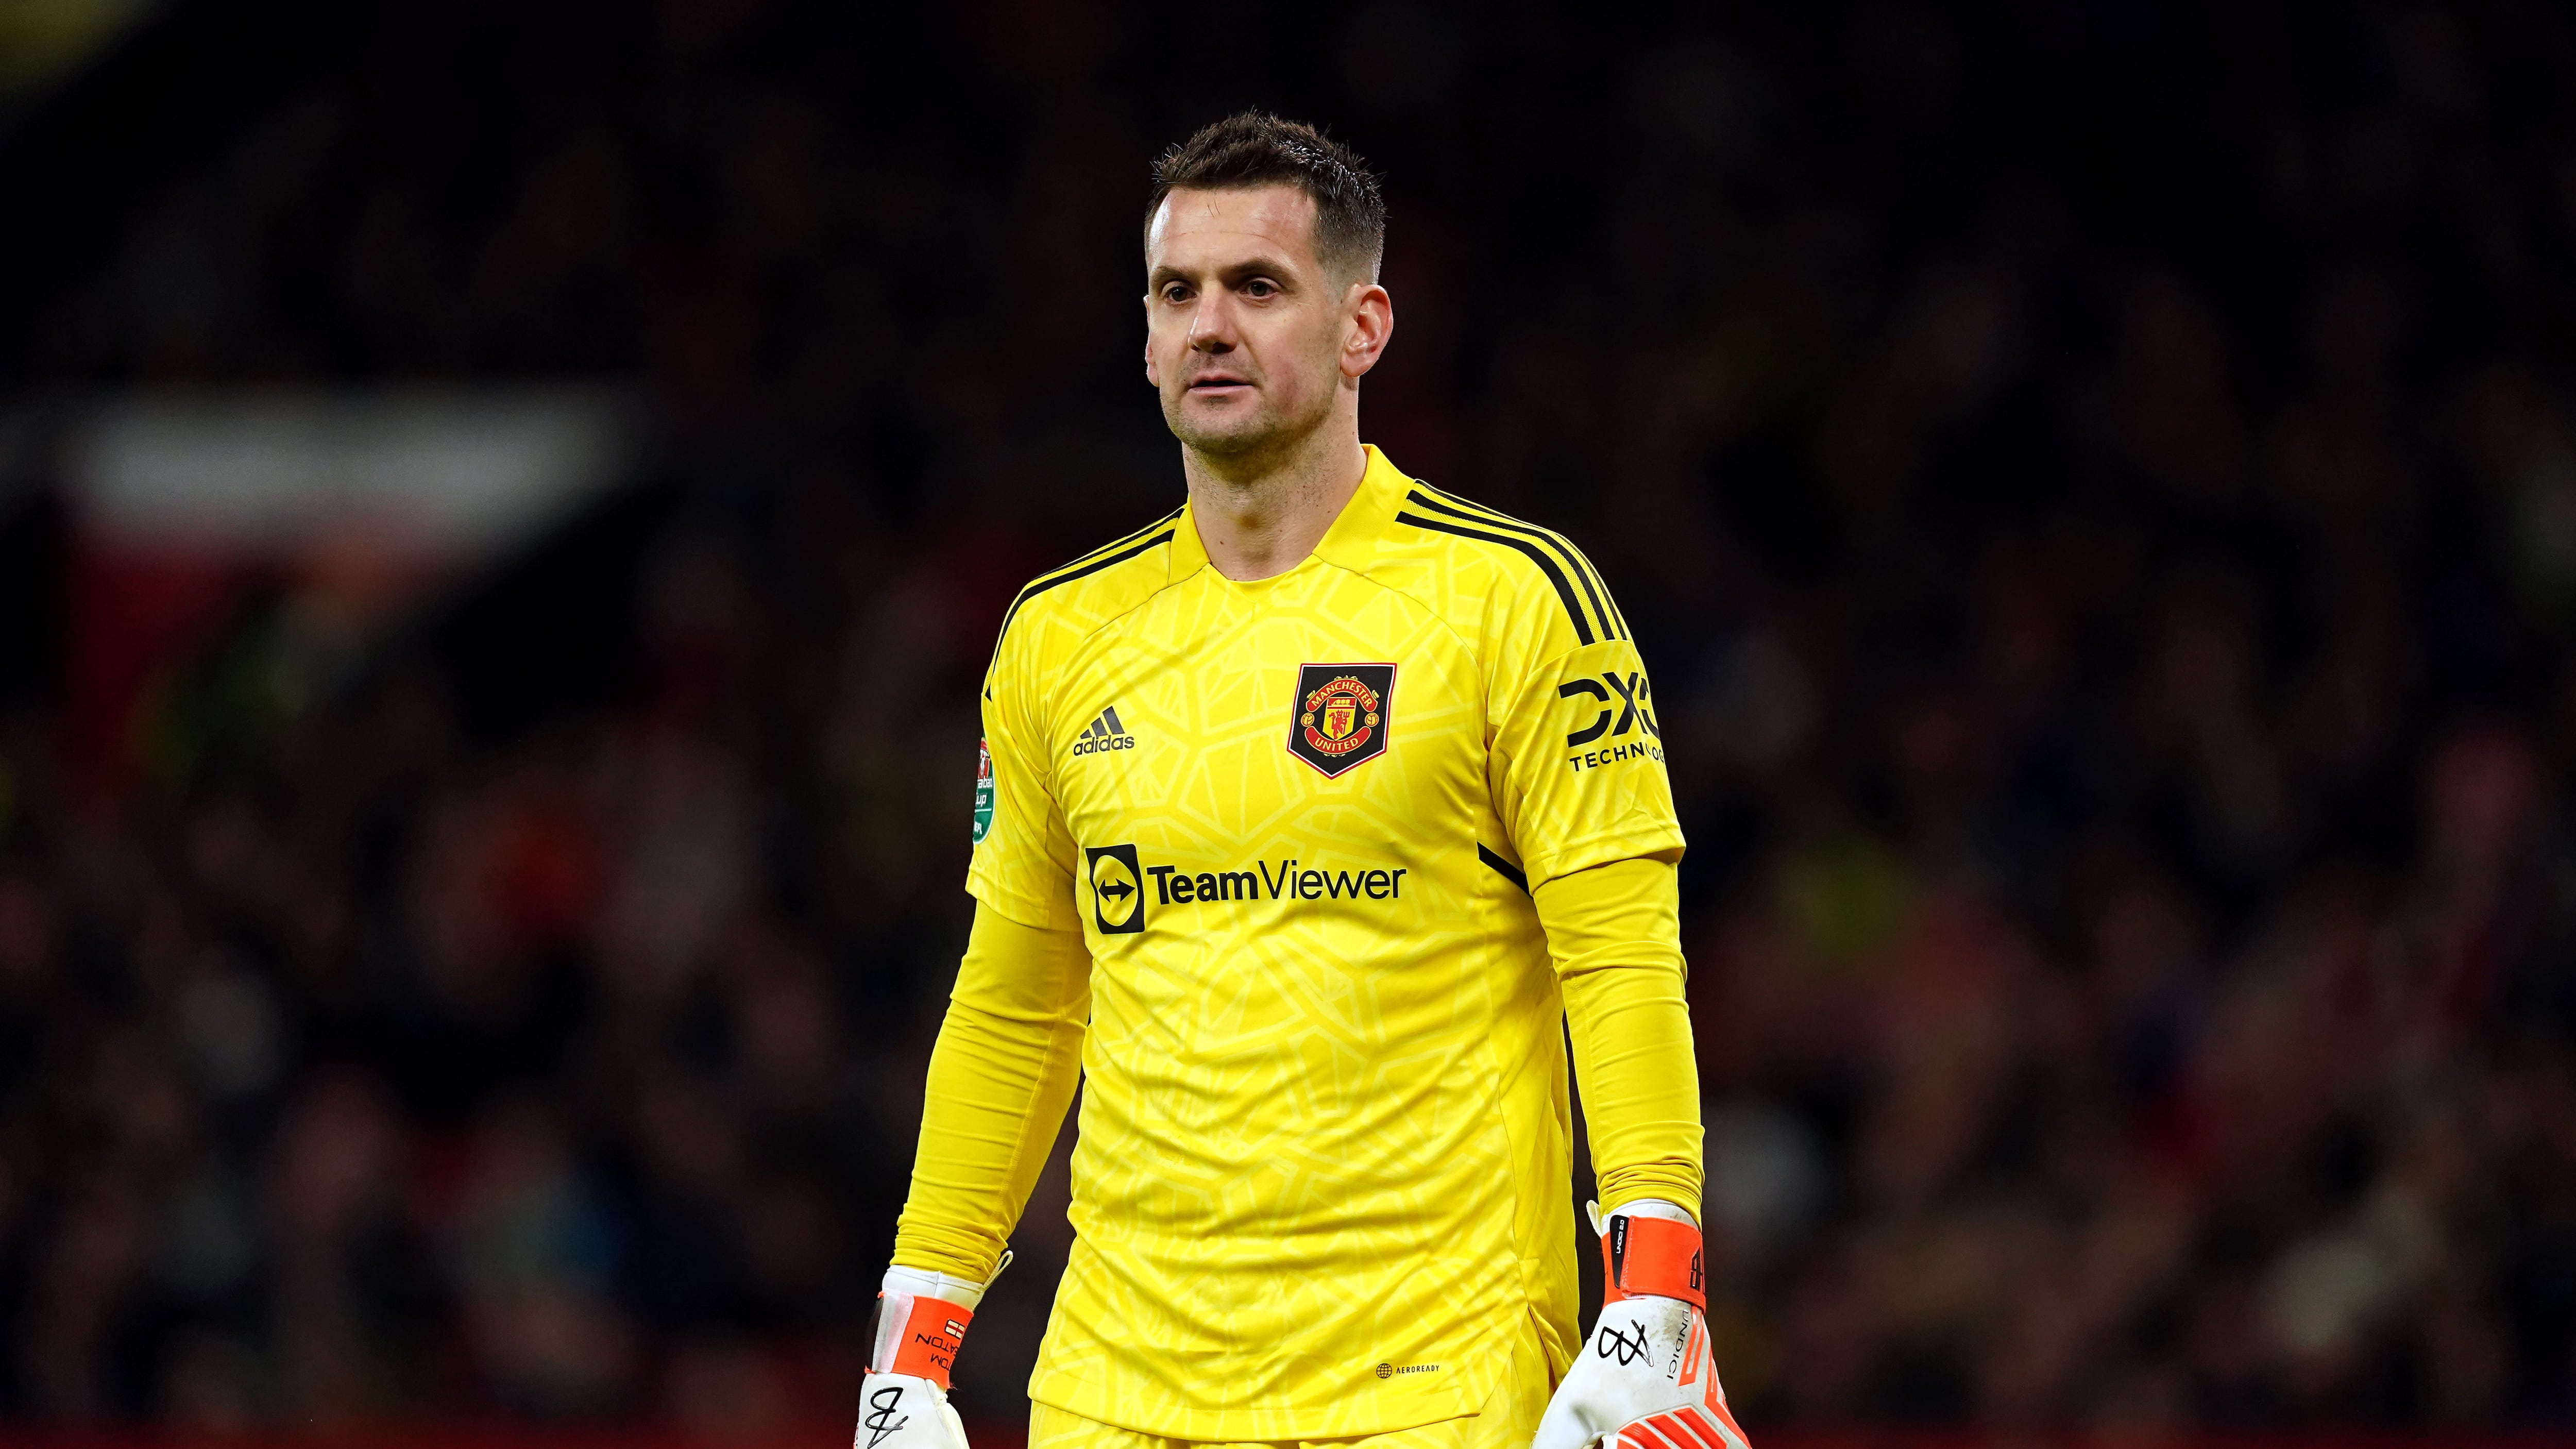 Tom Heaton has signed a new deal with Manchester United